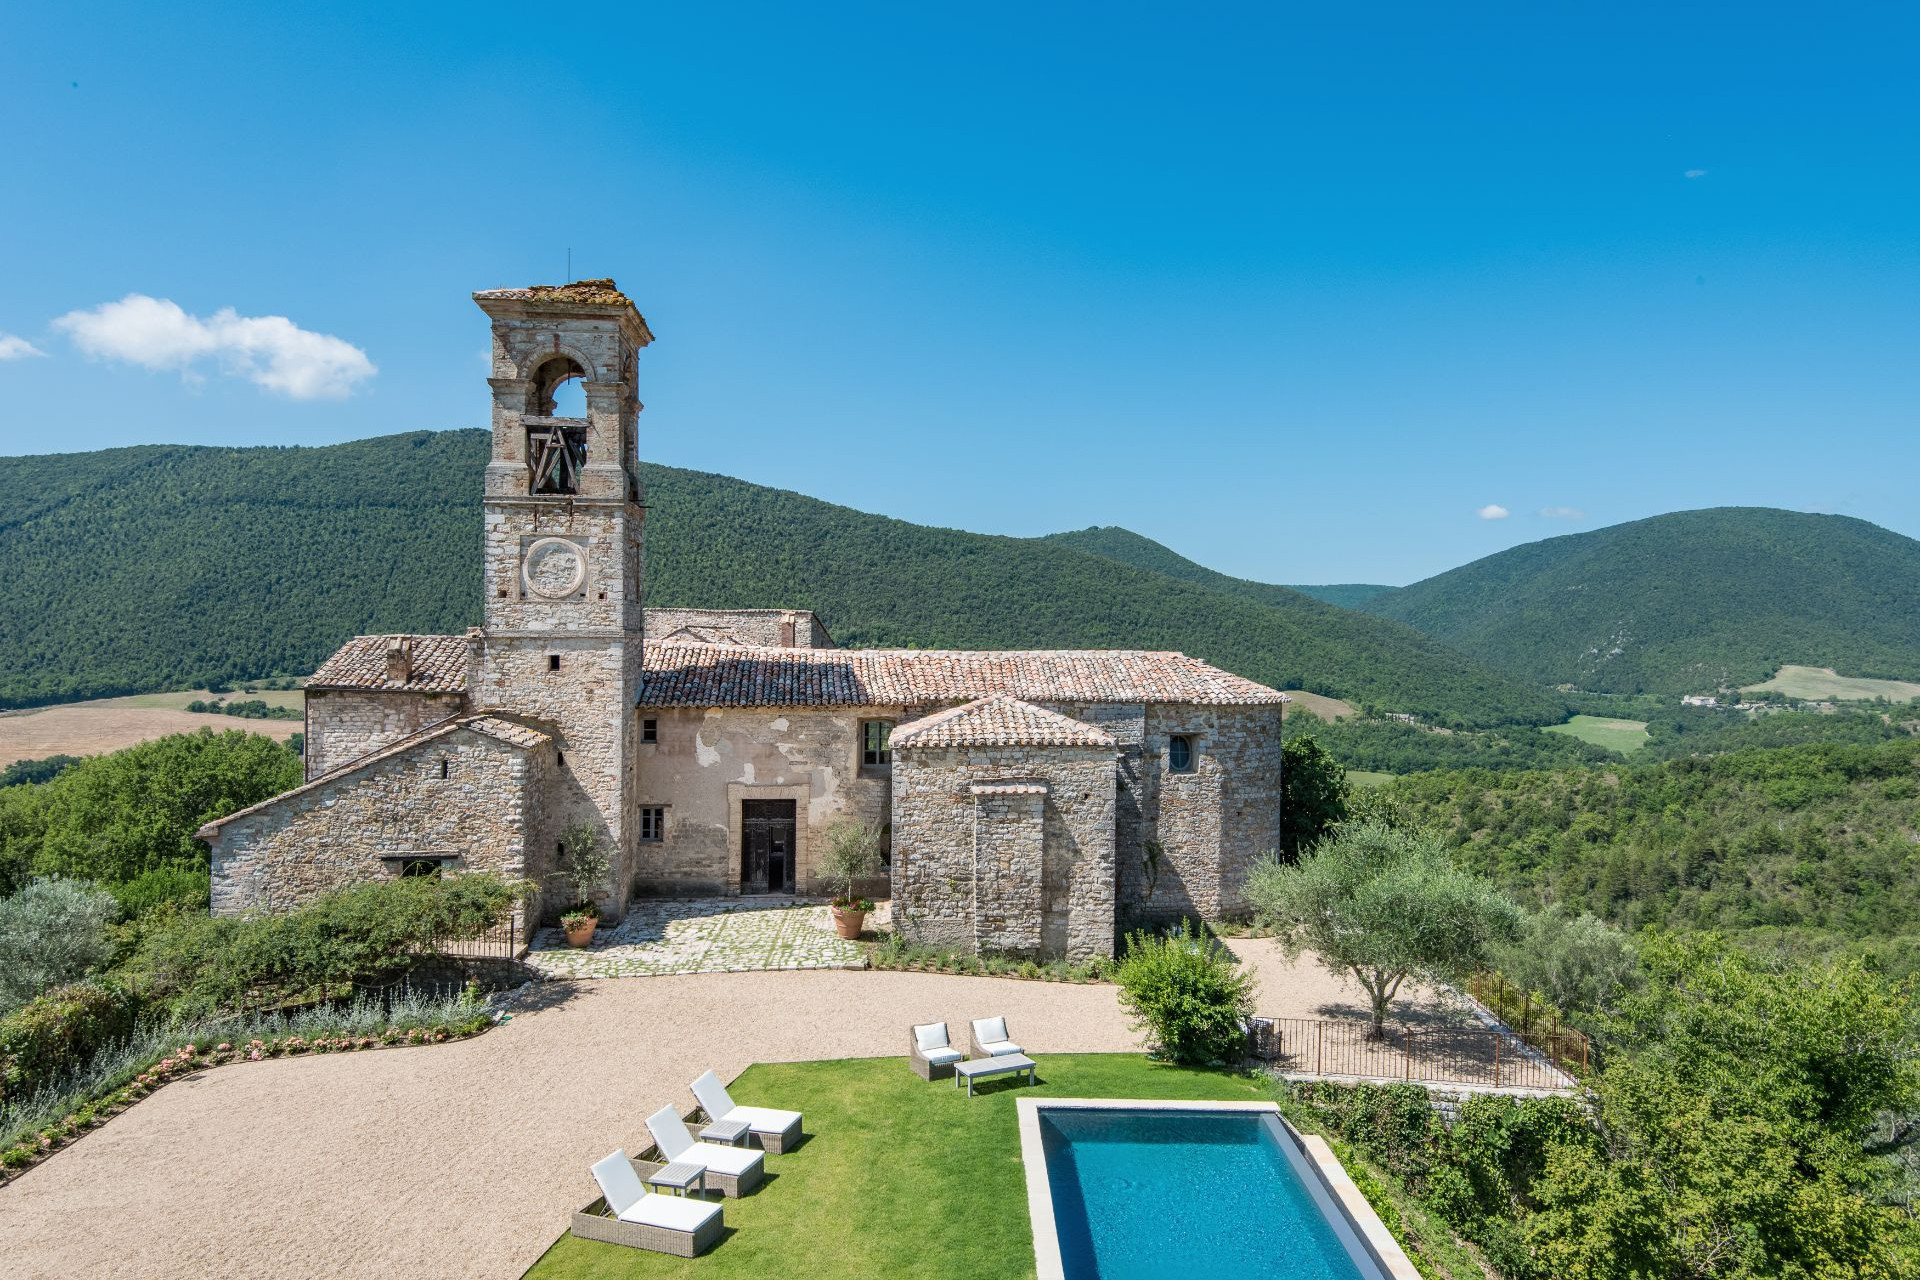 From southern Italy to South Africa: Explore large villas to celebrate Thanksgiving